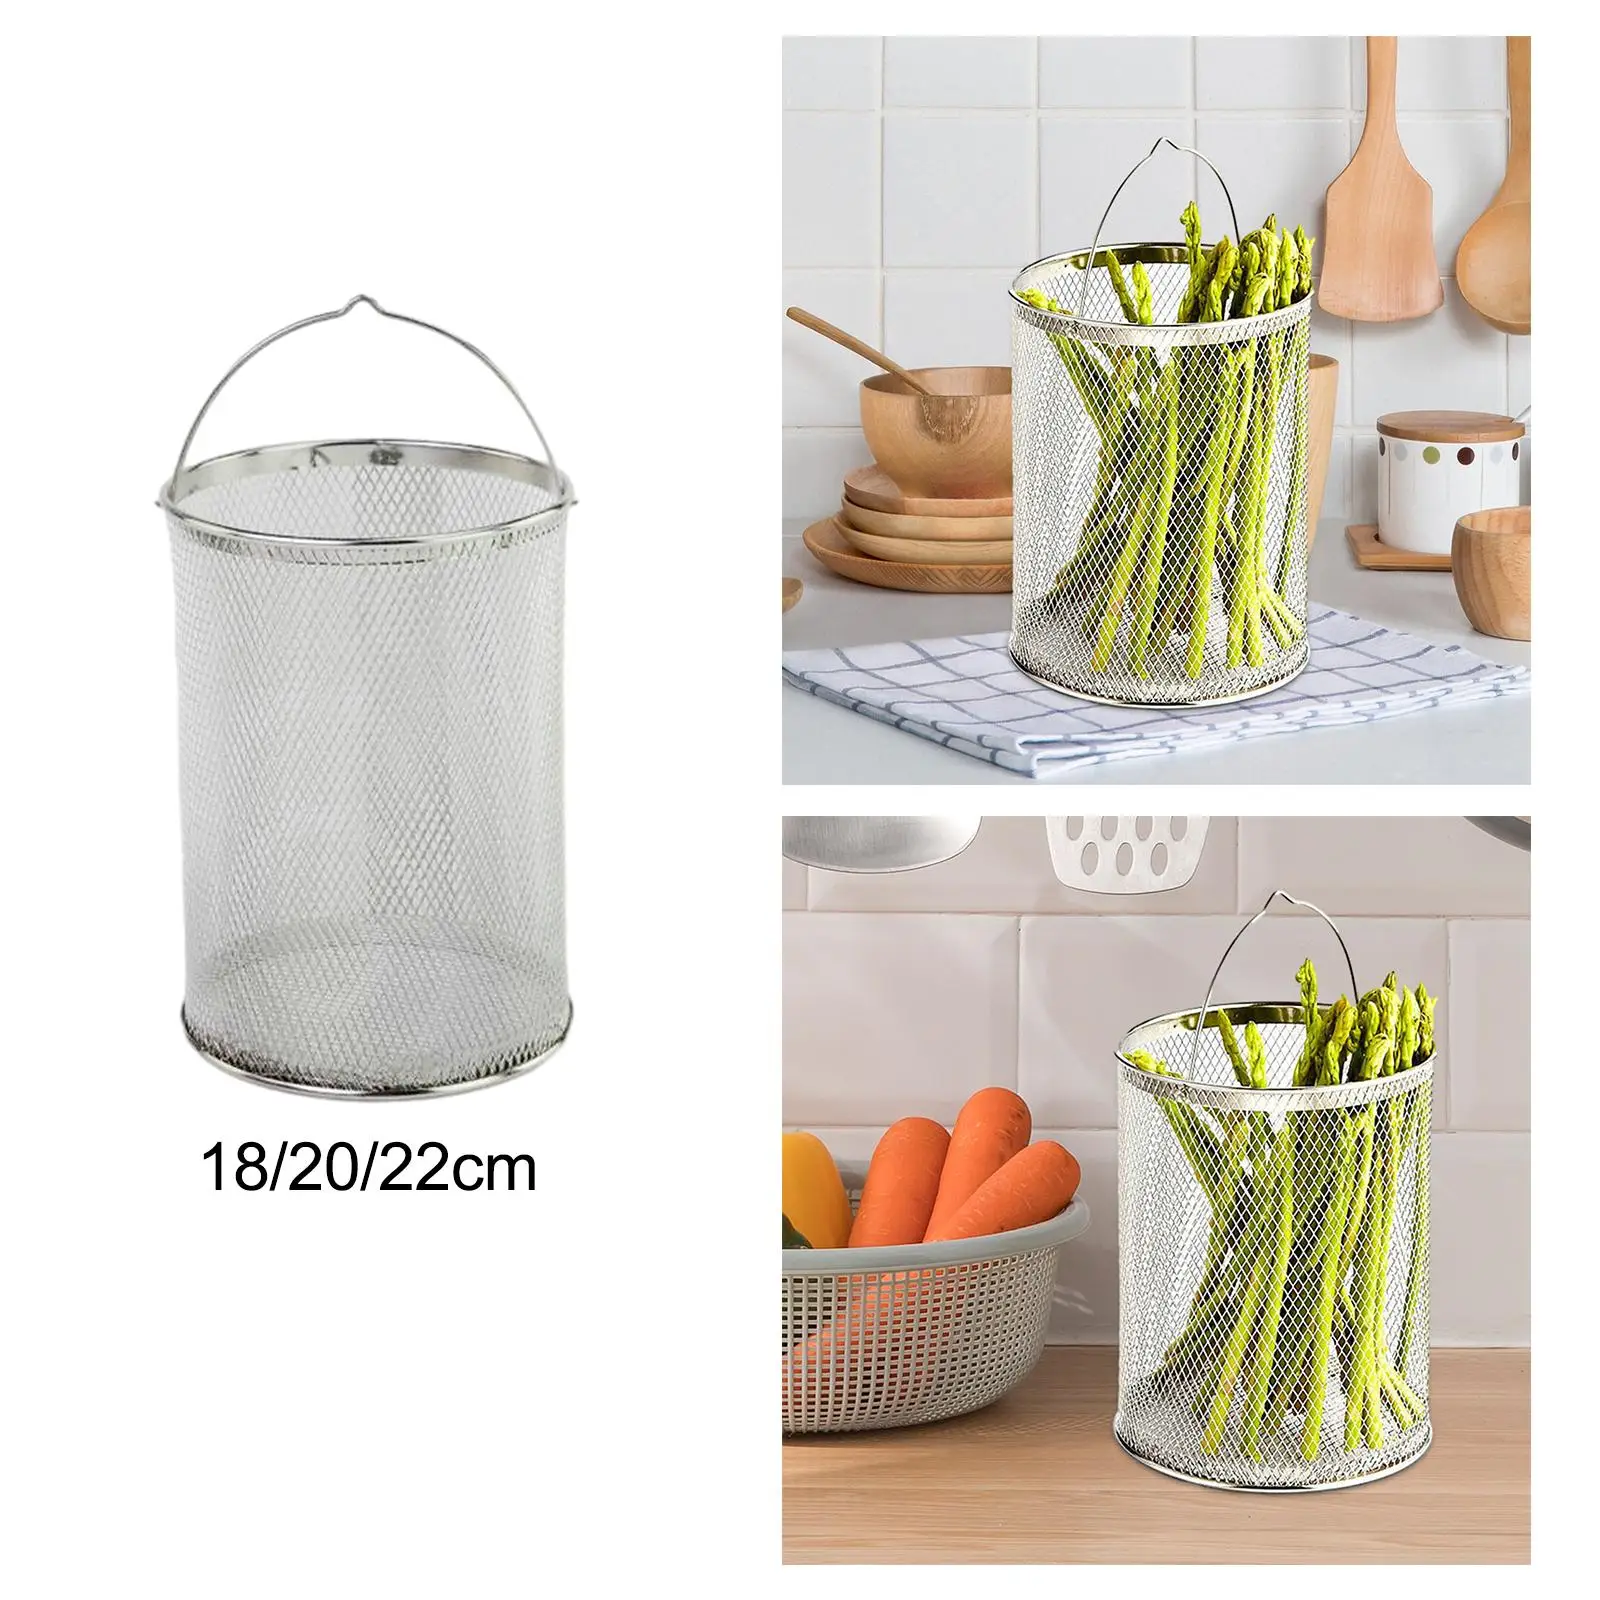 Stainless Steel Fry Basket Multifunctional Noodle Strainer Food Colander Stainless Steel Colander for Cooking Frying